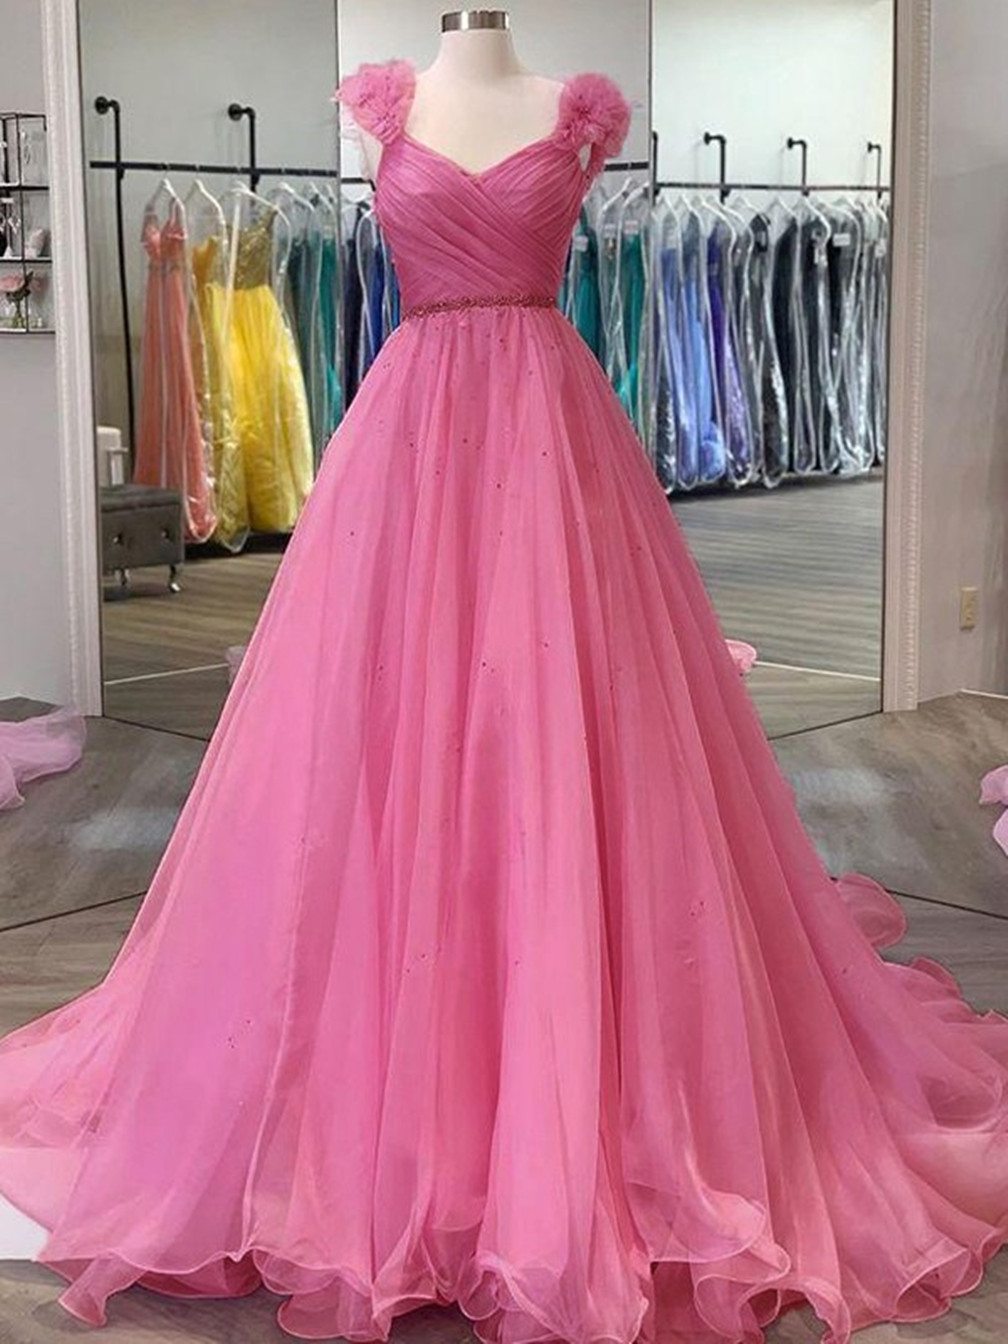 Women A-line/princess Prom Dresses Long V-neck Evening Party Gowns Sleeveless Formal Dress Yp074